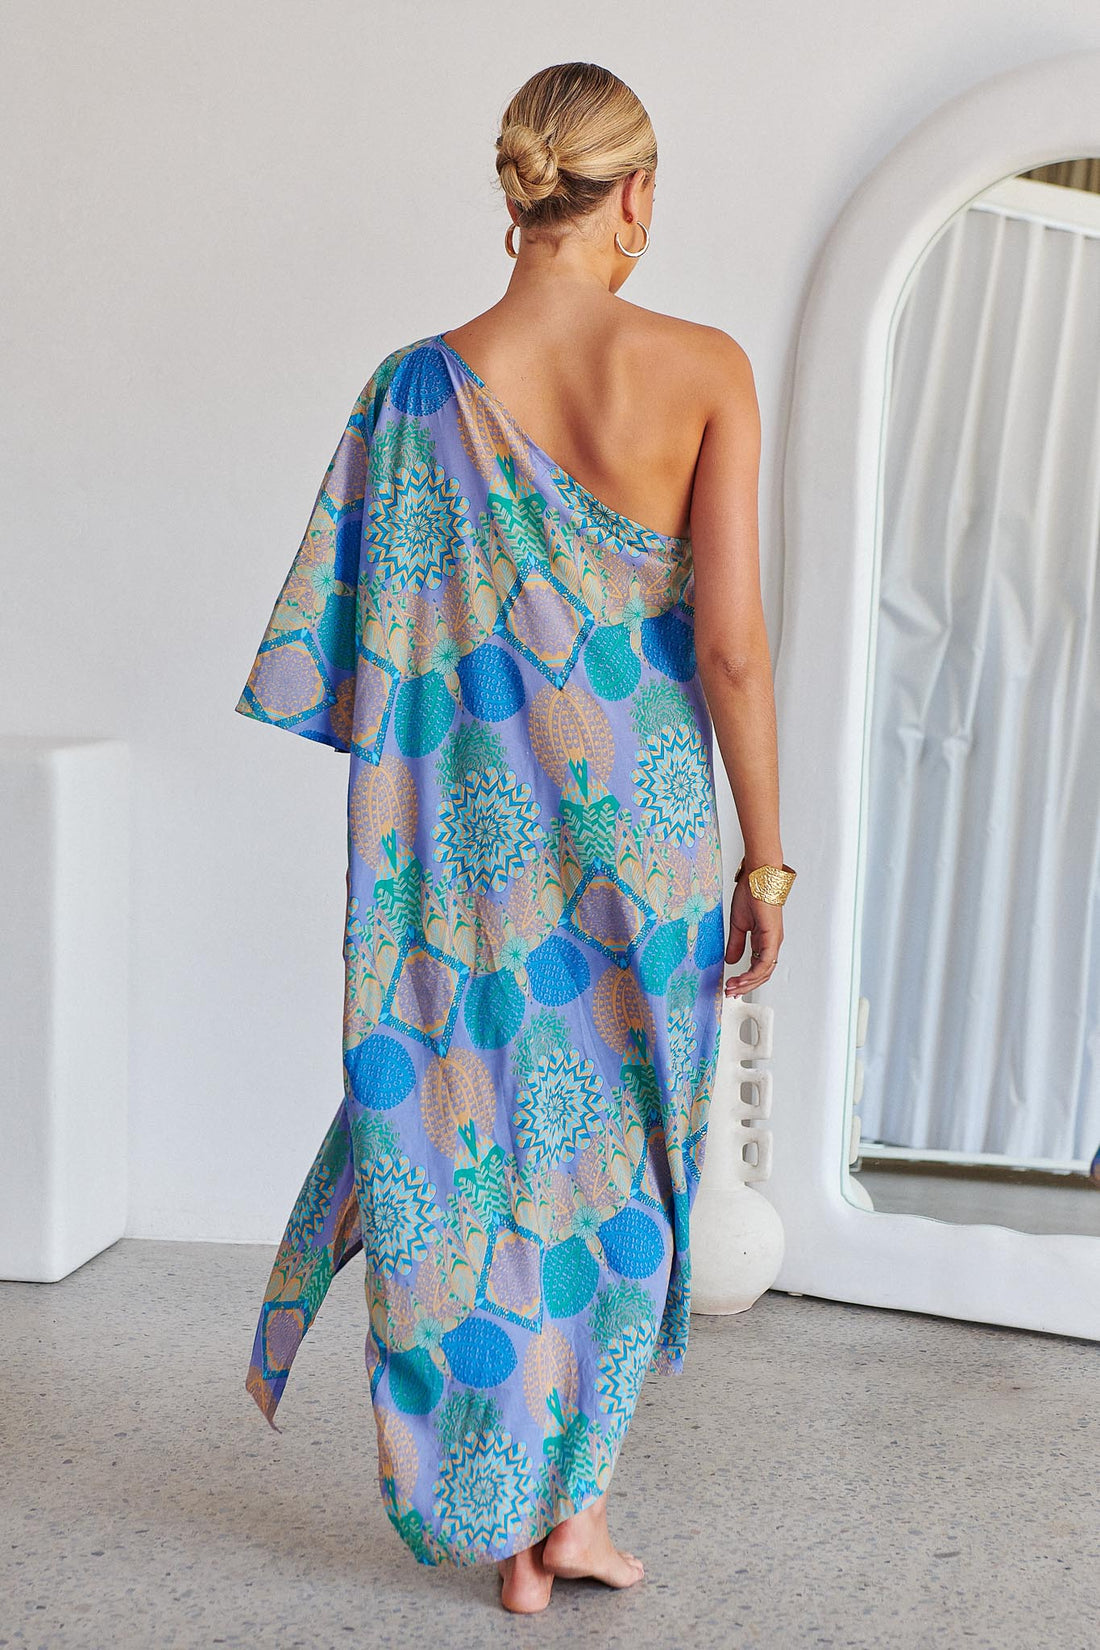 Sojo One Shoulder Dress - Pacific Print - SALE